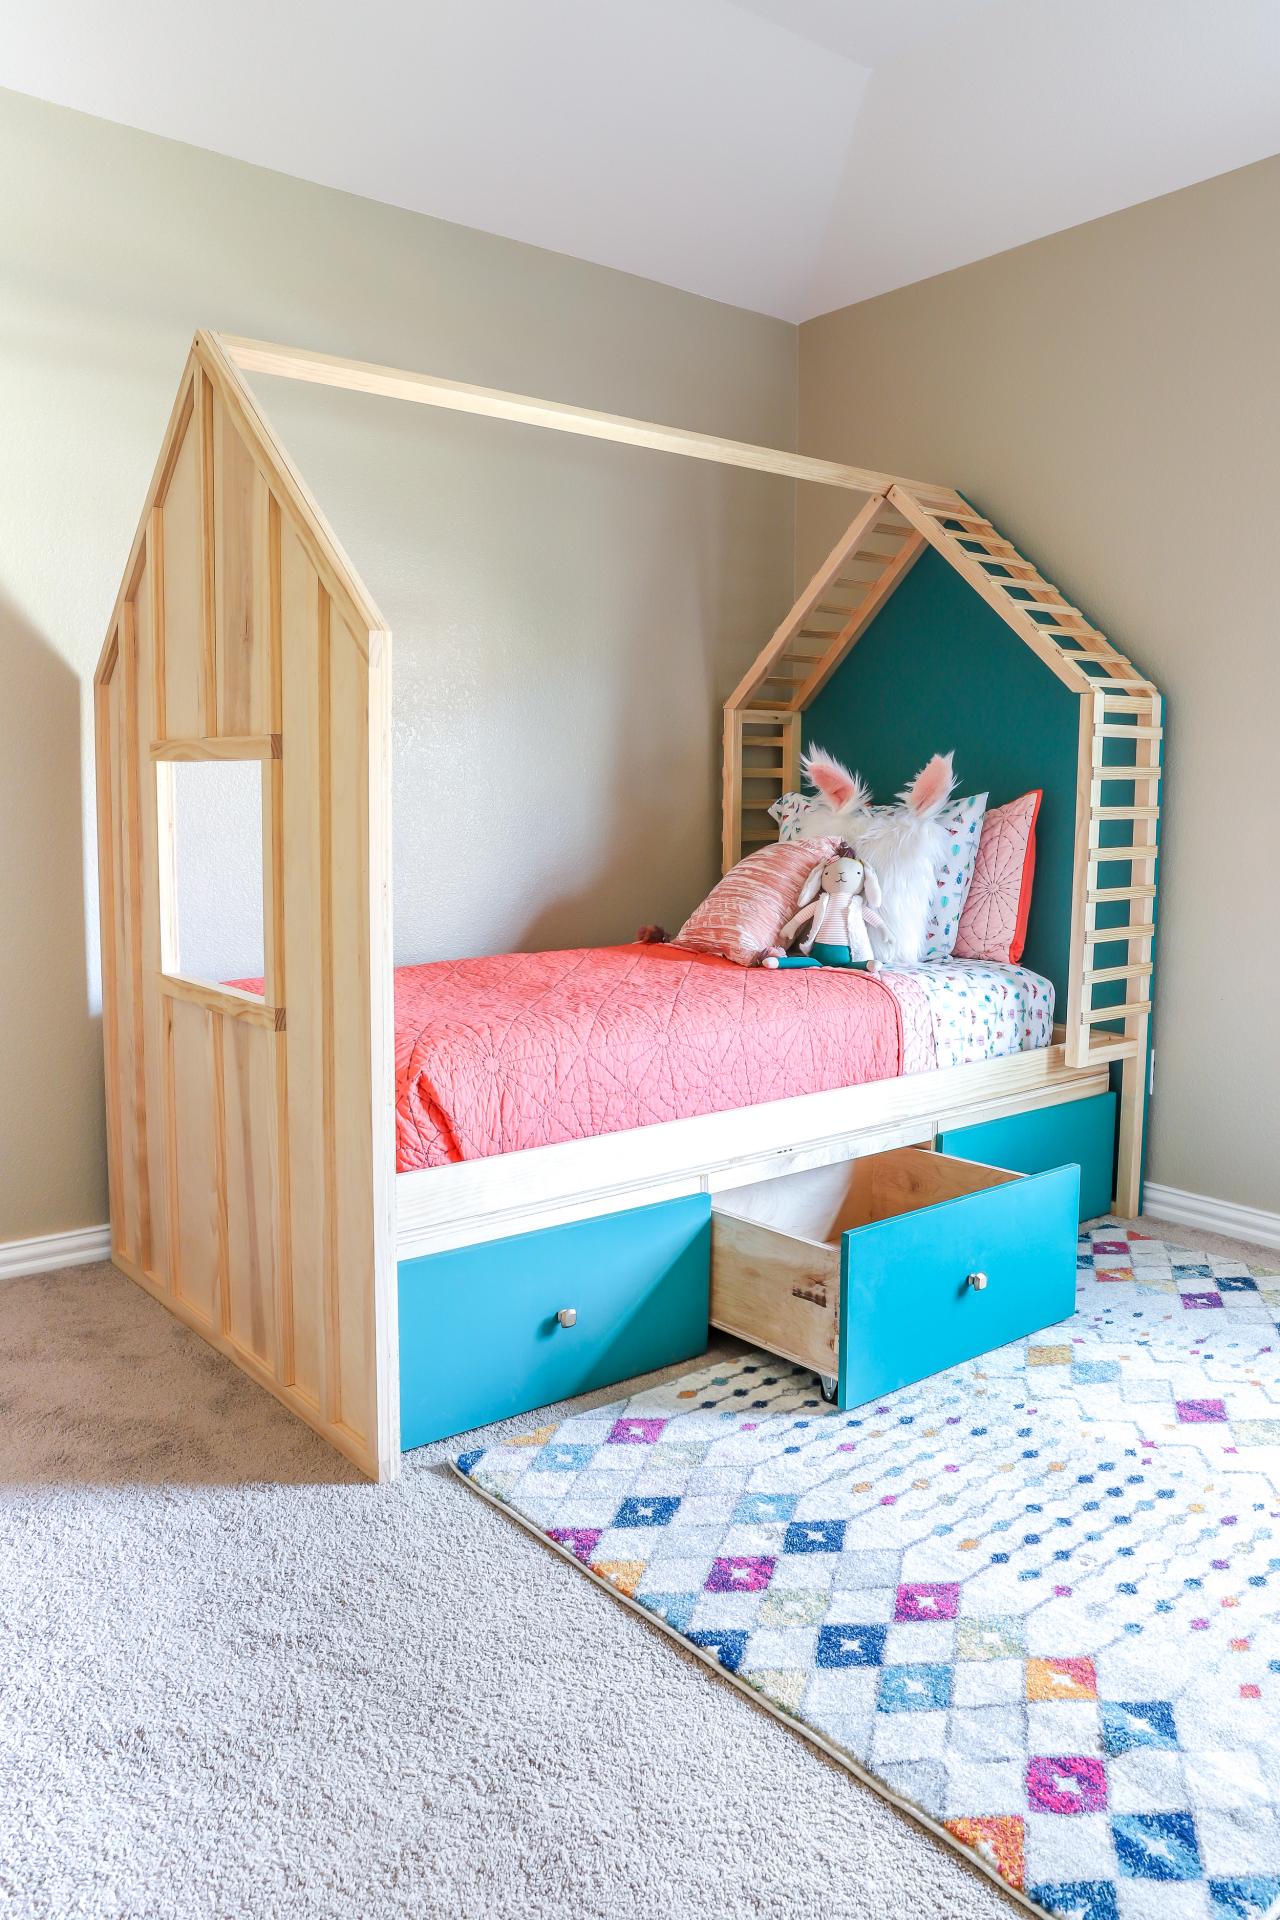 Children bed House Without Mattress 29 dimensions Kids Bed  Wooden bed